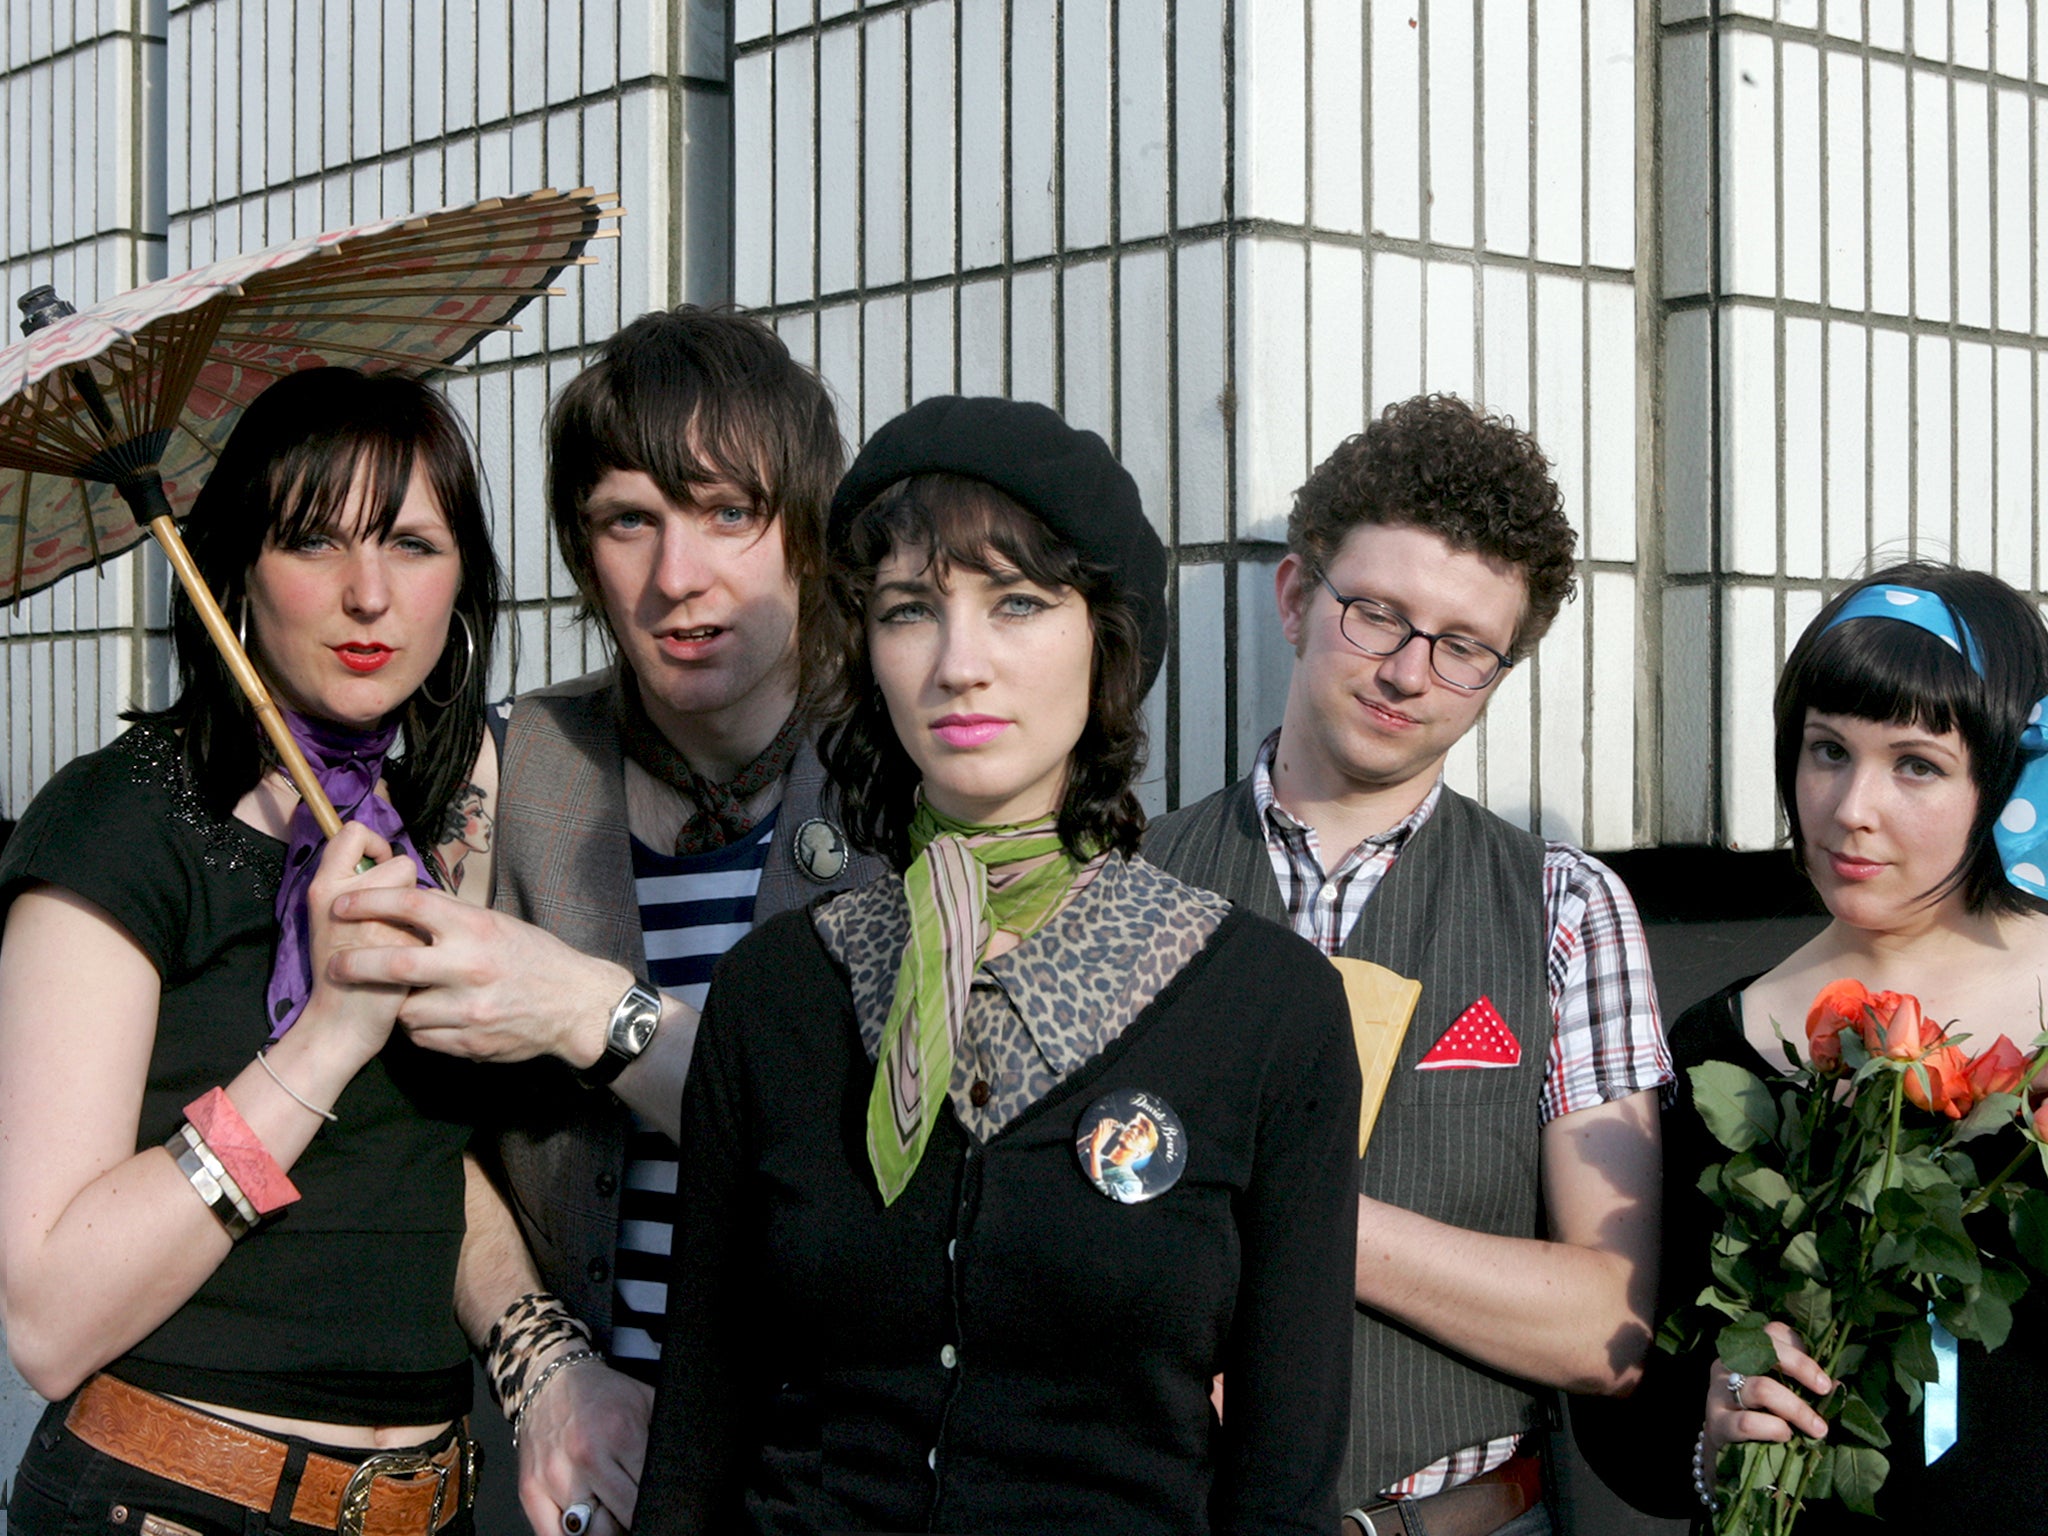 The Long Blondes in 2009